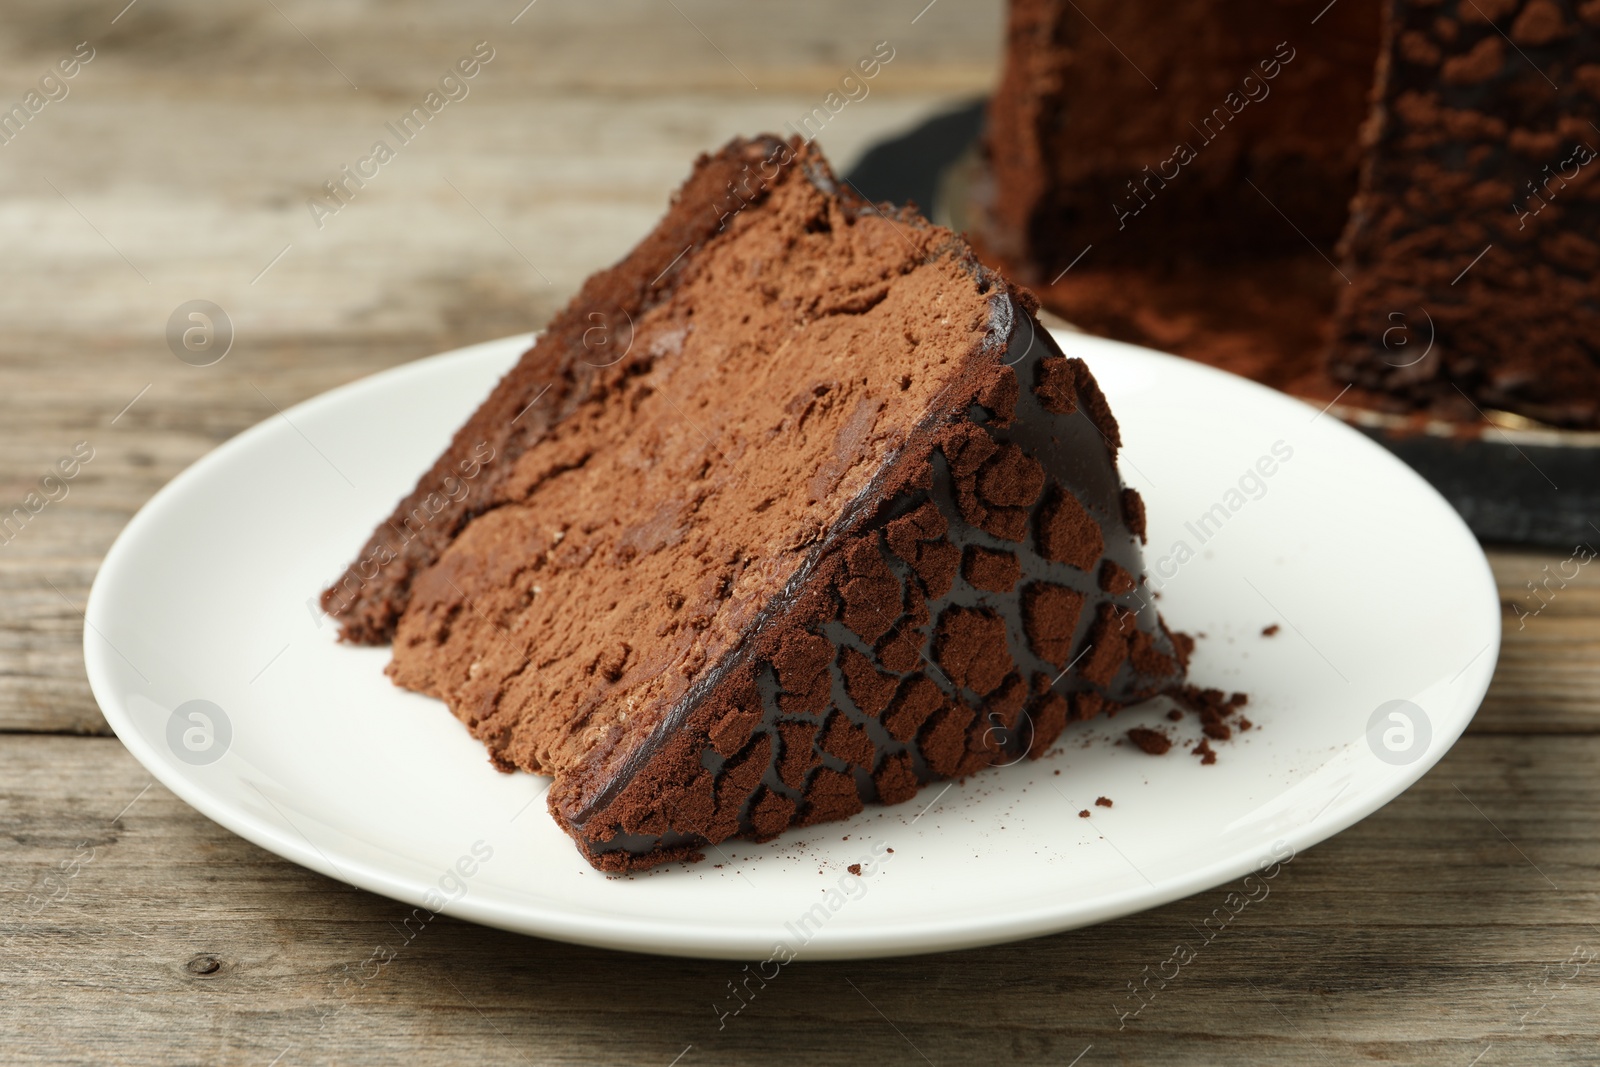 Photo of Piece of delicious chocolate truffle cake on wooden table, closeup